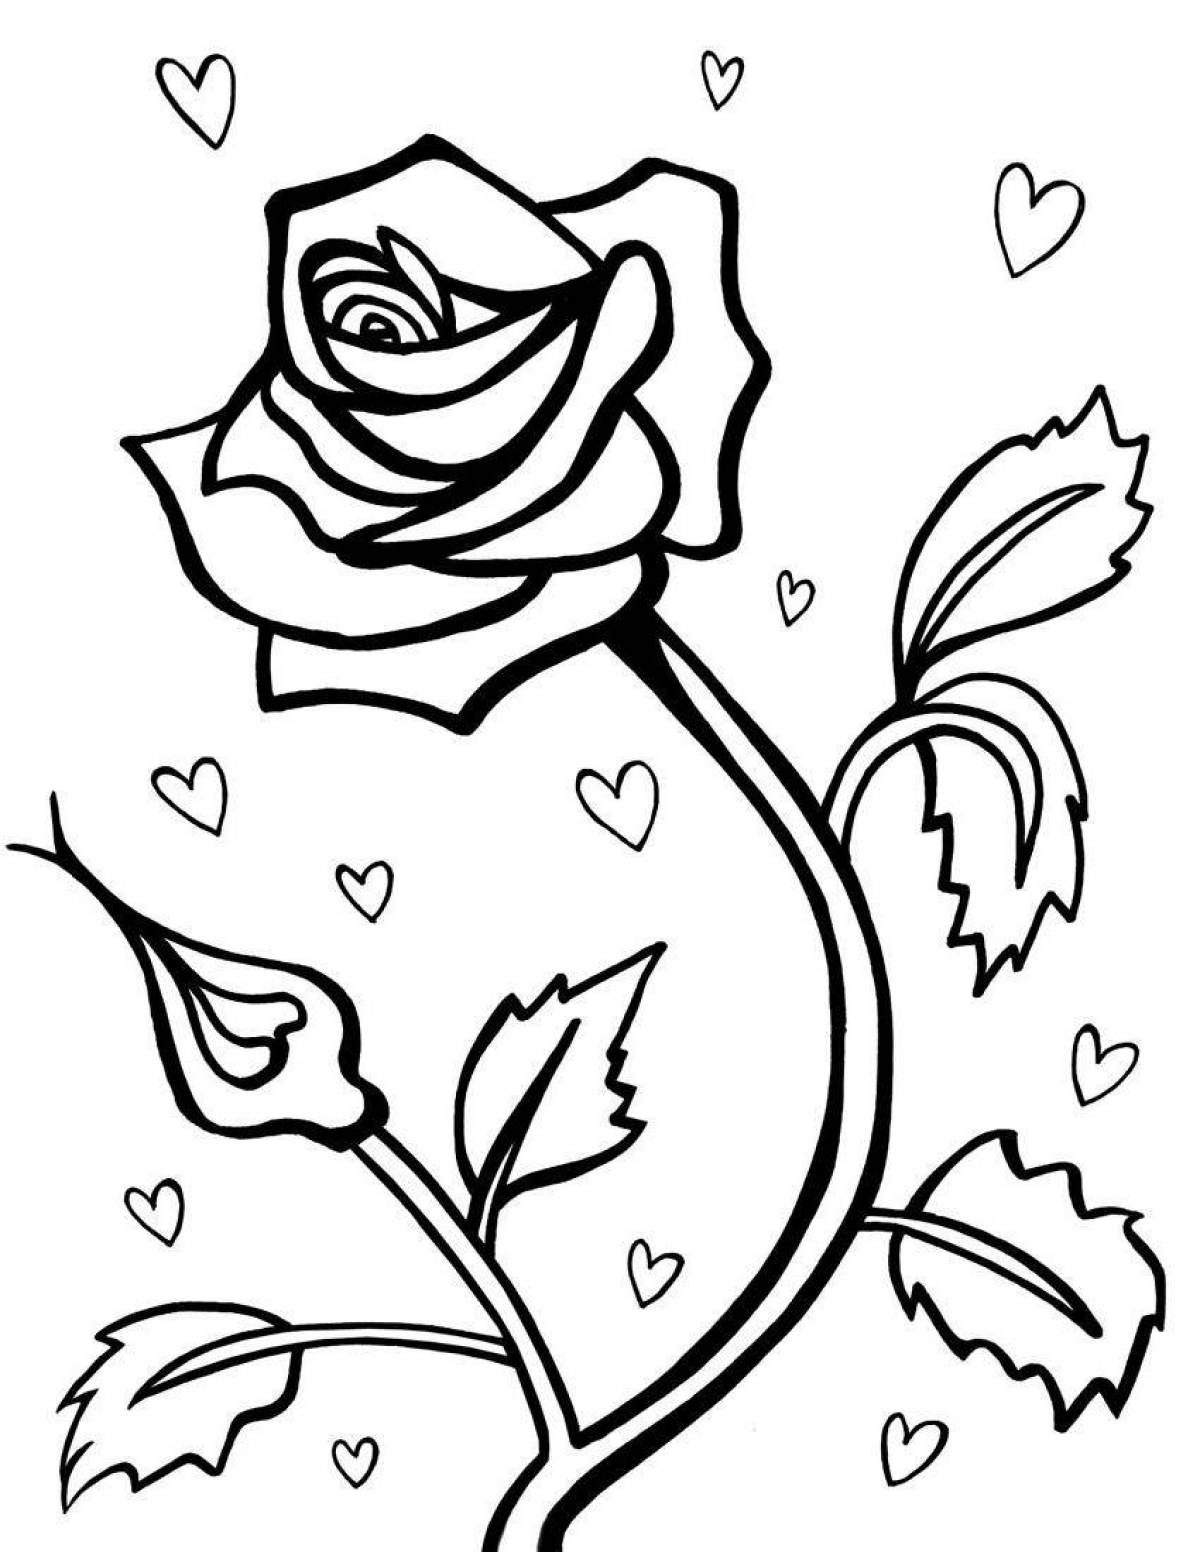 Adorable rose coloring pages for 5-6 year olds